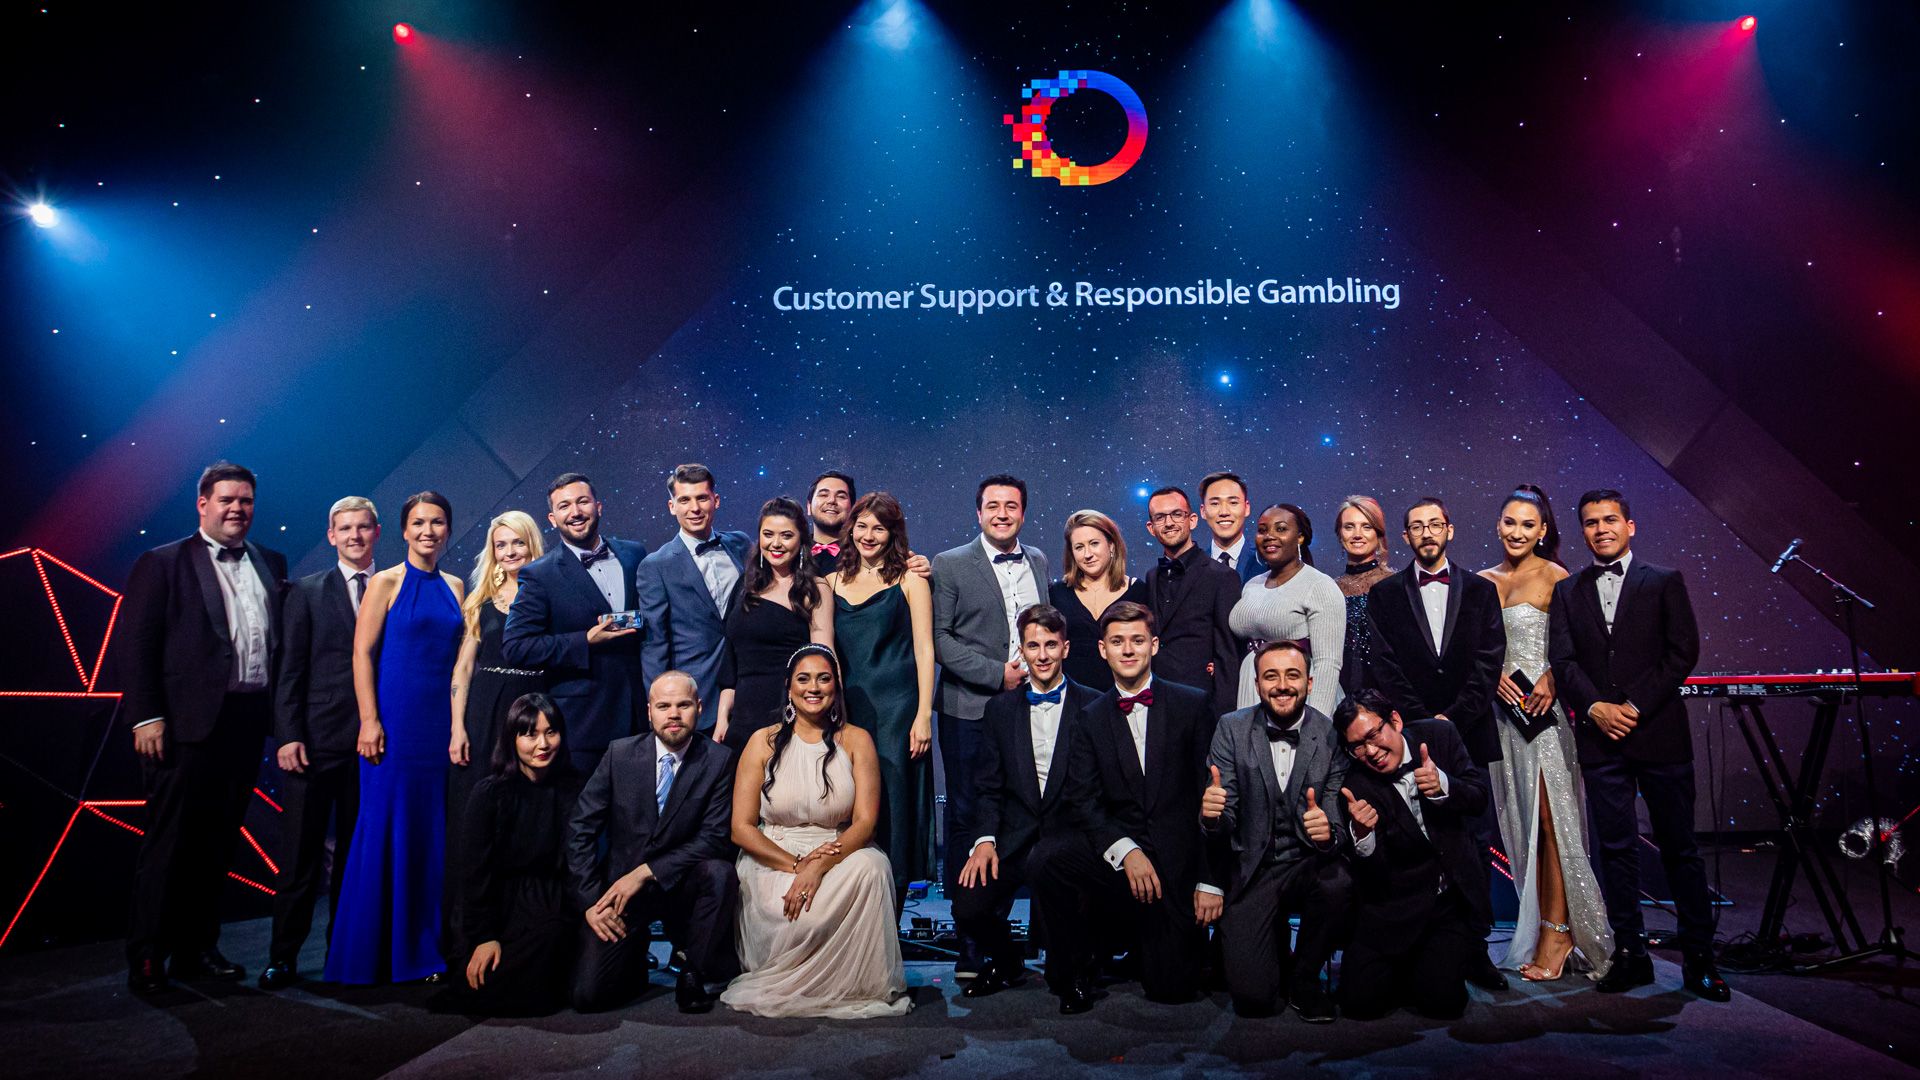 What made the Customer Support the Team of the Year (Twice) at Coingaming?